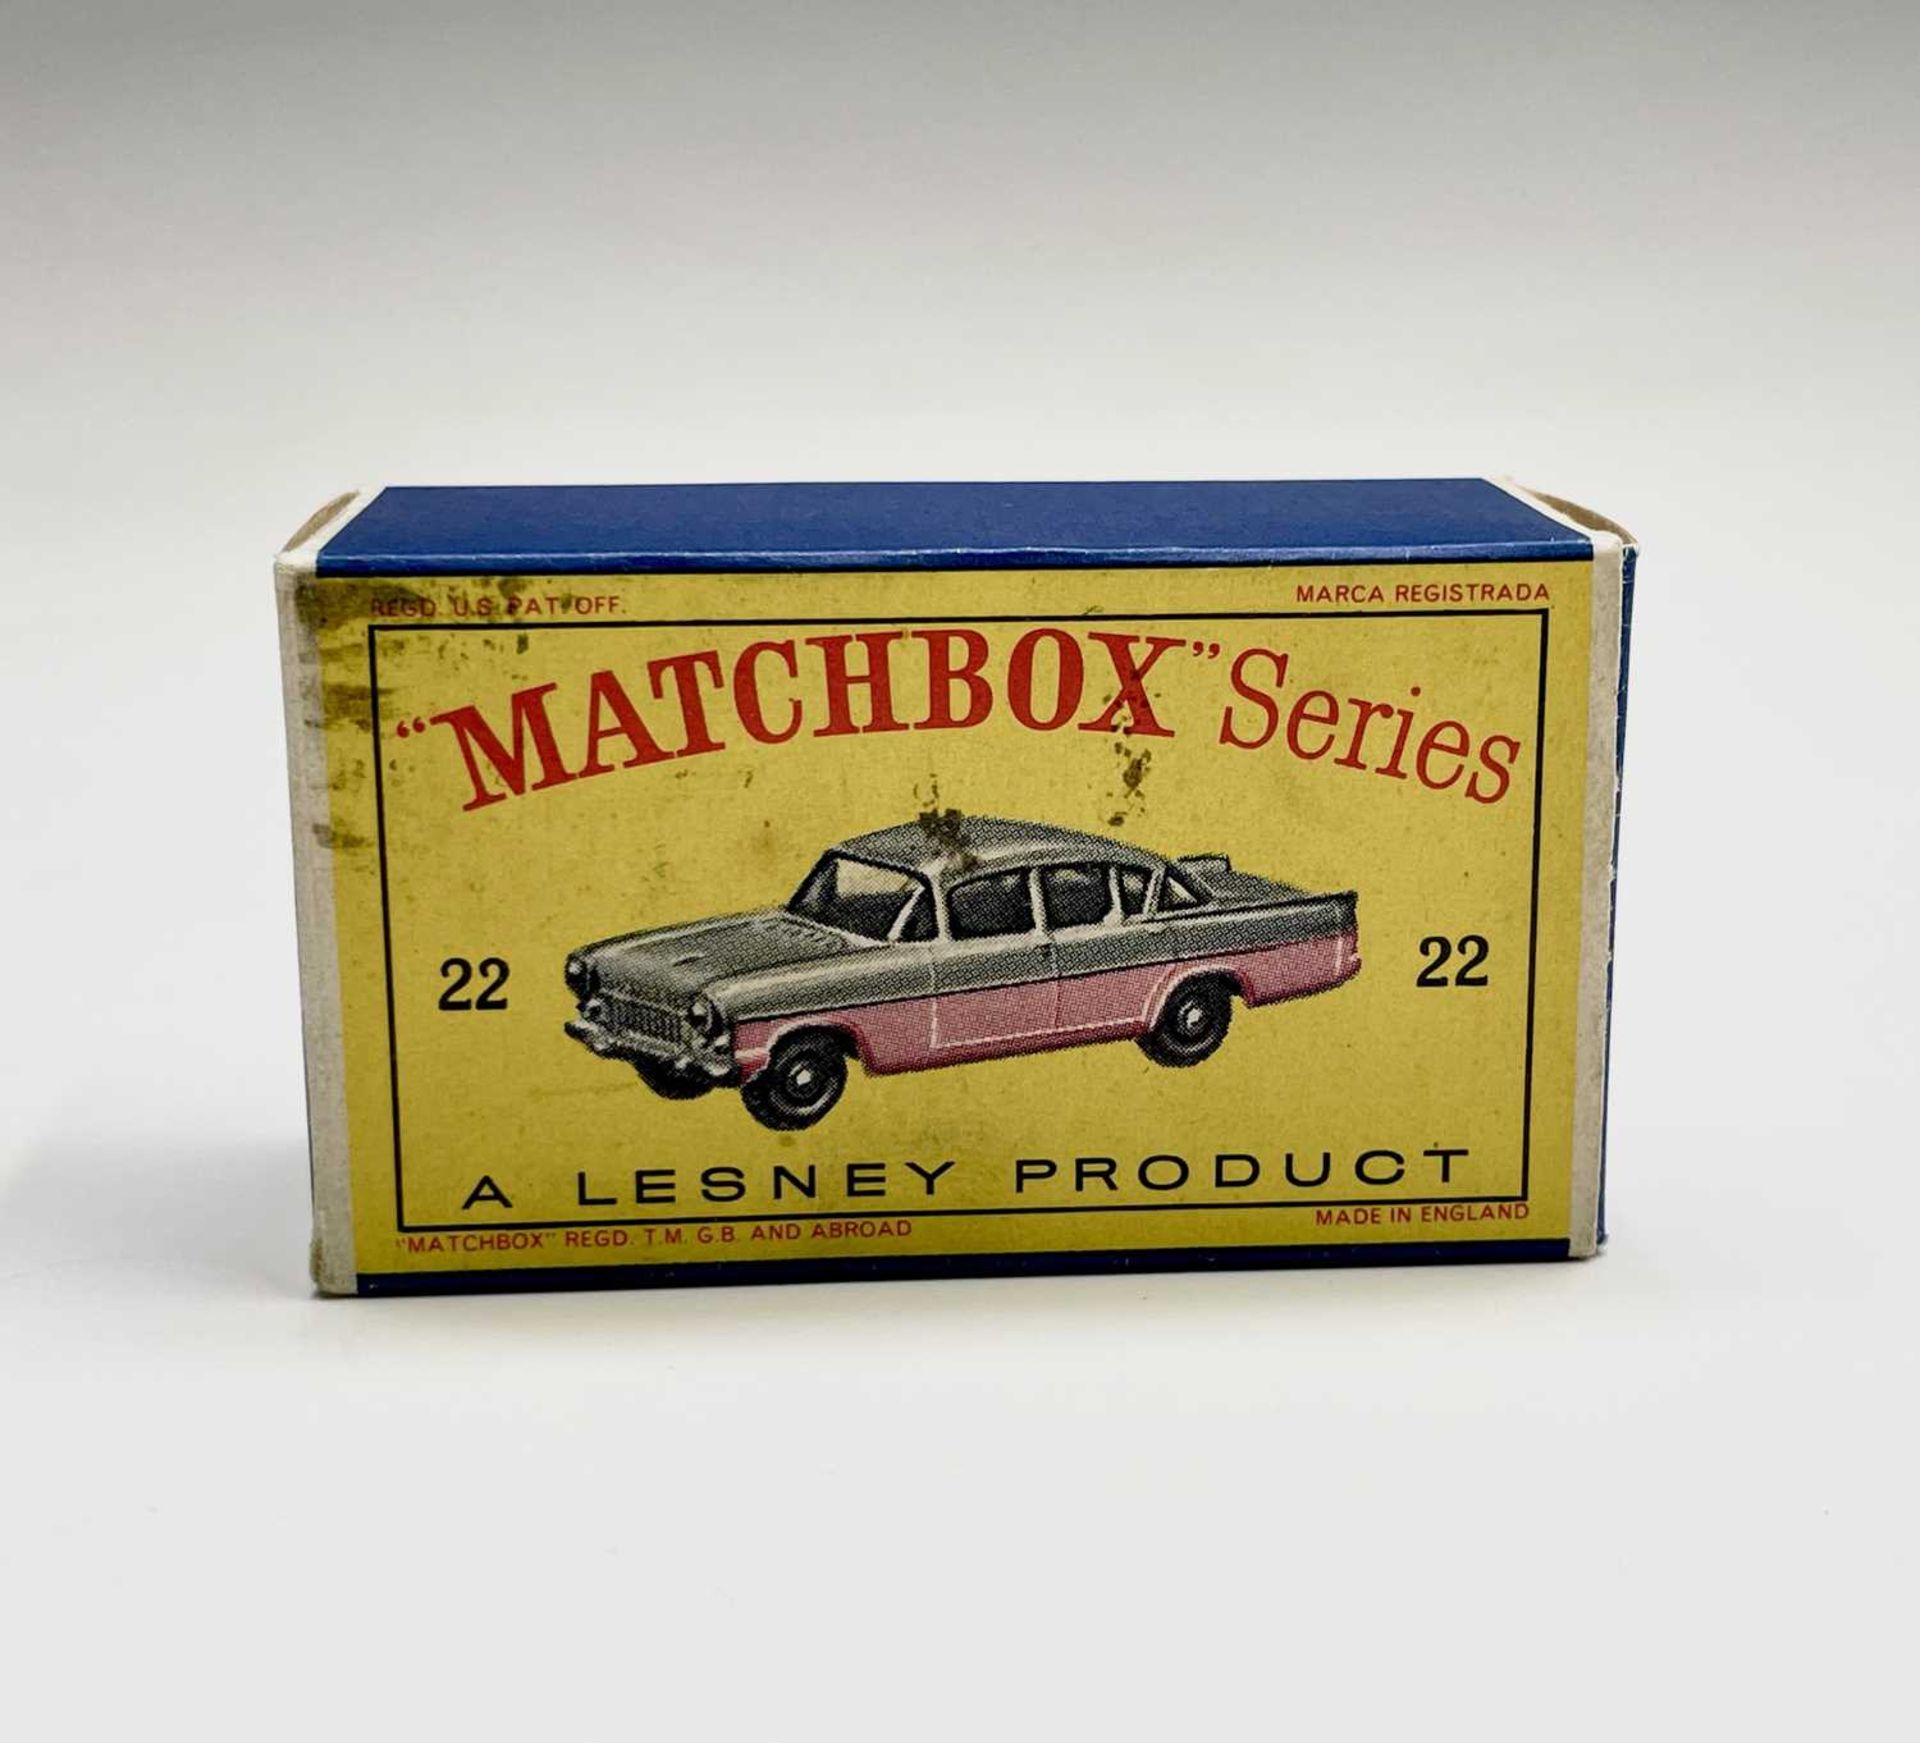 Lesney - Matchbox Toy no 22. Vauxhall Cresta, gold body S.P.W. mint boxed - box has some staining on - Image 2 of 6